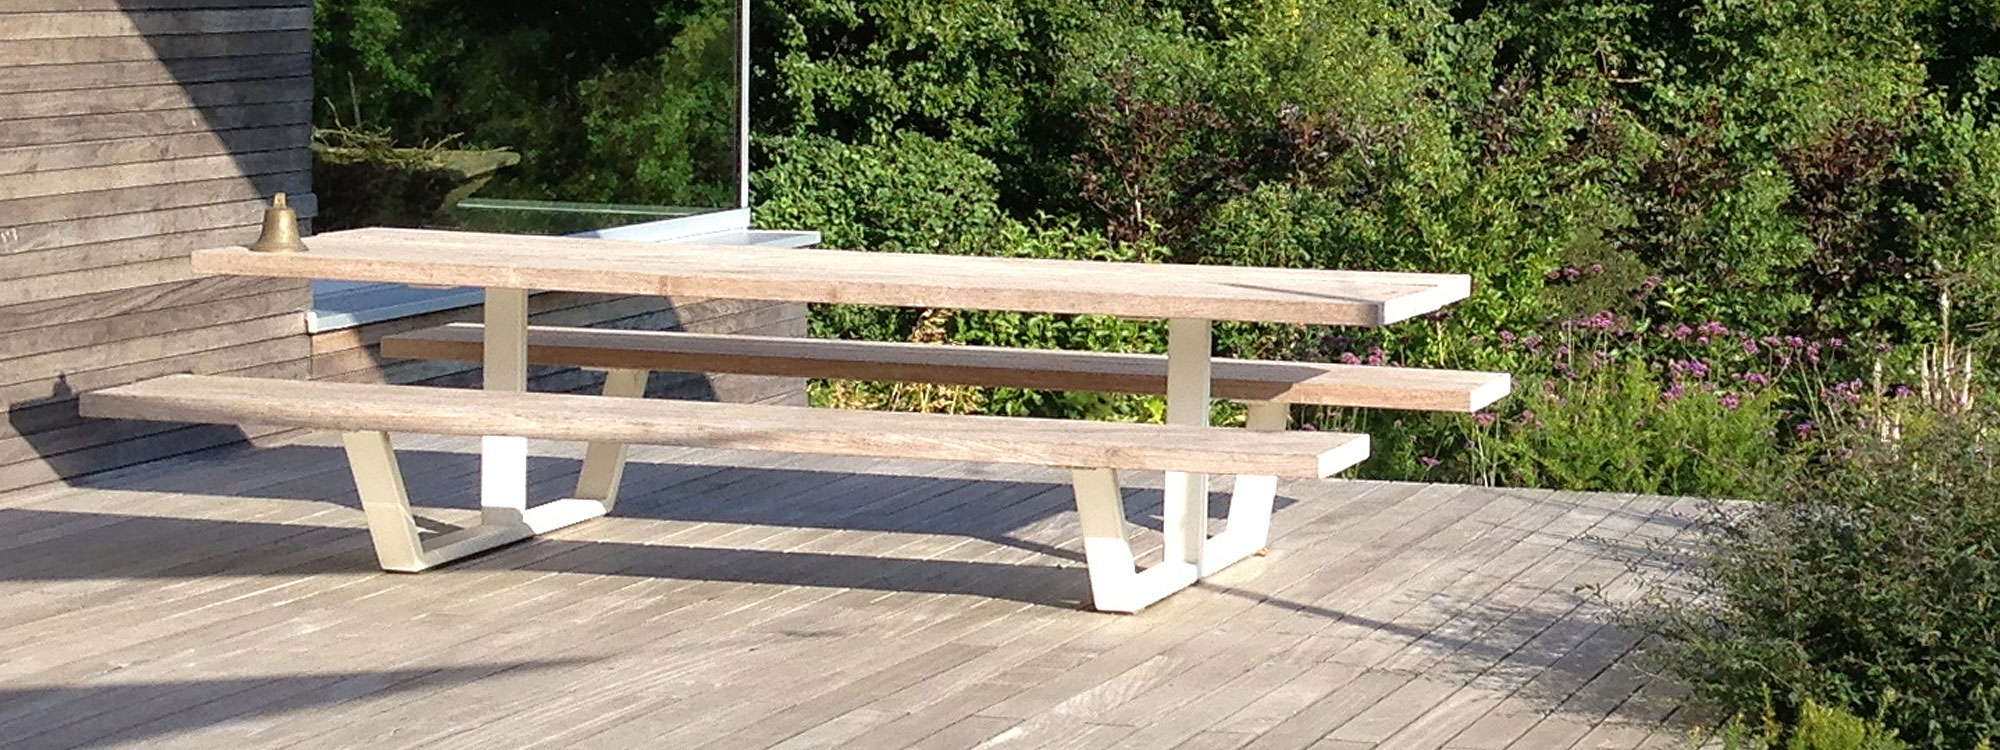 Cassecroute MODERN Picnic Table & LUXURY PICNIC FURNITURE. SHORT Or LONG Picnic Table Sizes Up To 14m Made In High QUALITY Picnic Furniture Materials. Cassecroute DESIGNER Picnic FURNITURE Designed By Ronald Mattelé.